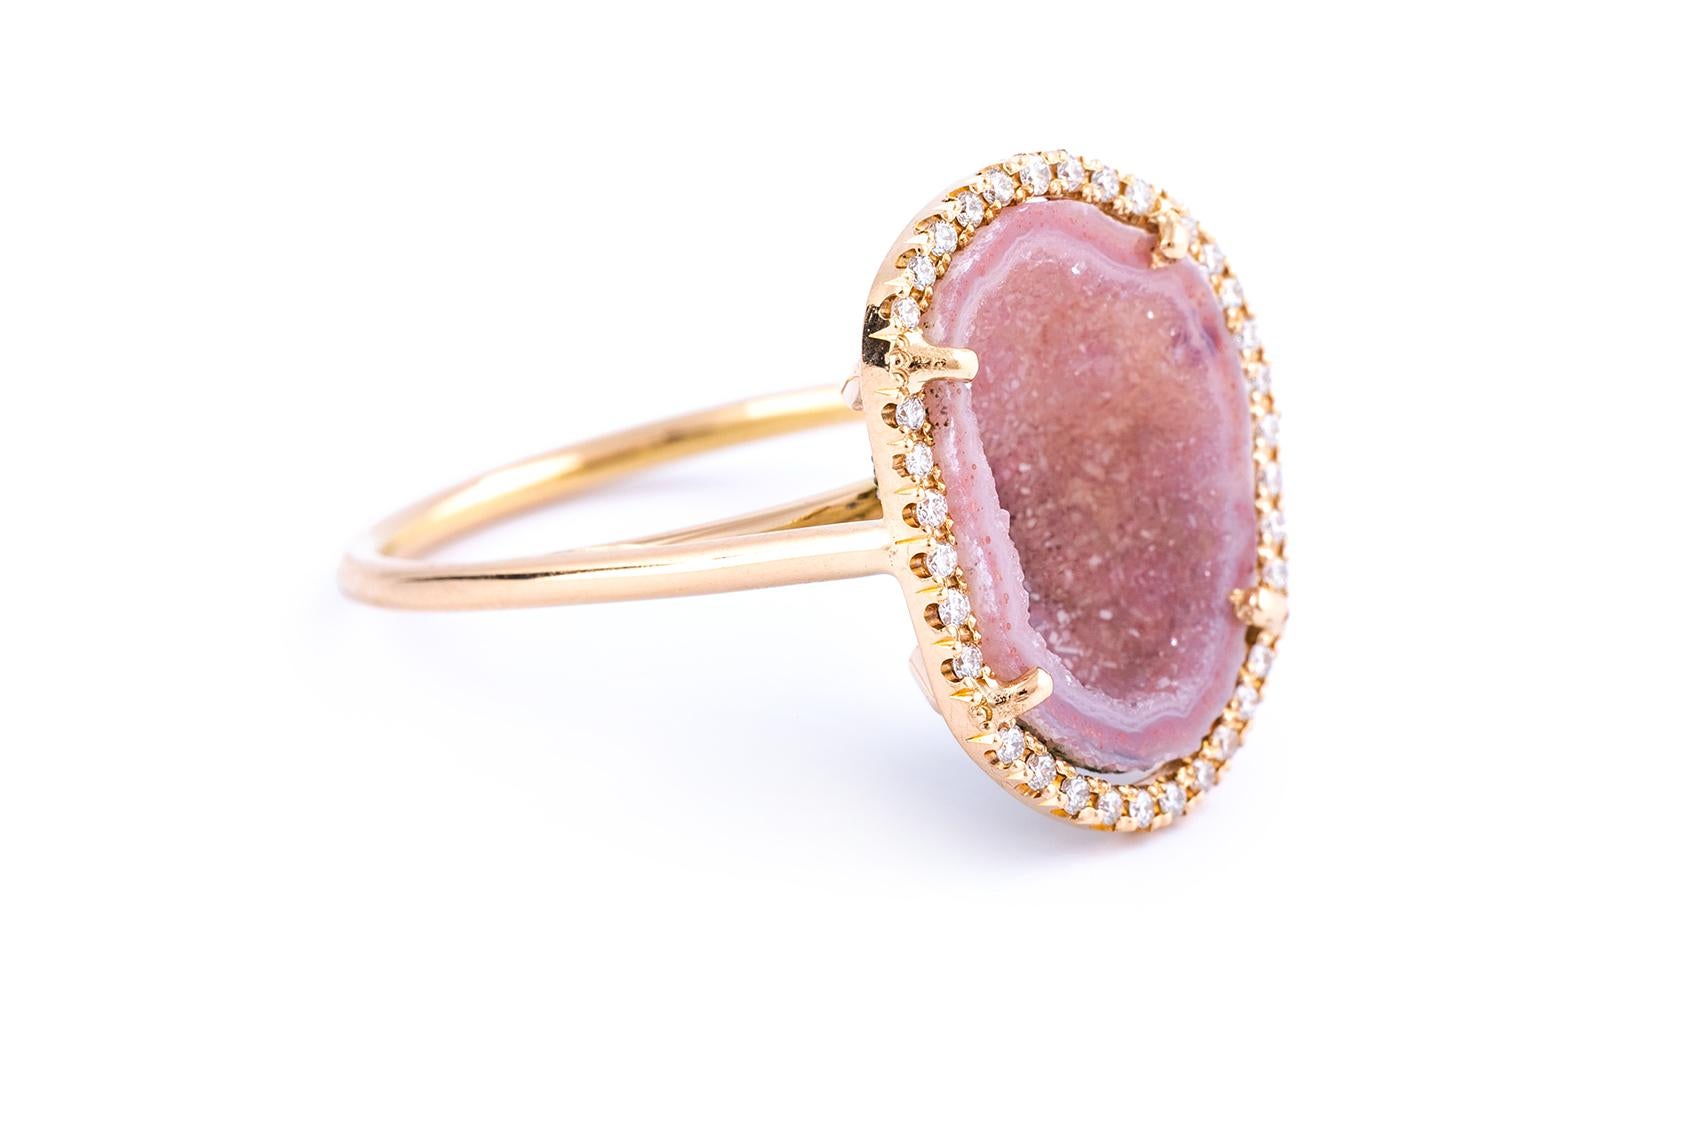 Pink is the new black!
This cute pink ring is the perfect ring to give the one you love.
Set with 18 k rose gold and 0,20 ct shimmering diamonds.
Great for summer and winter styles.